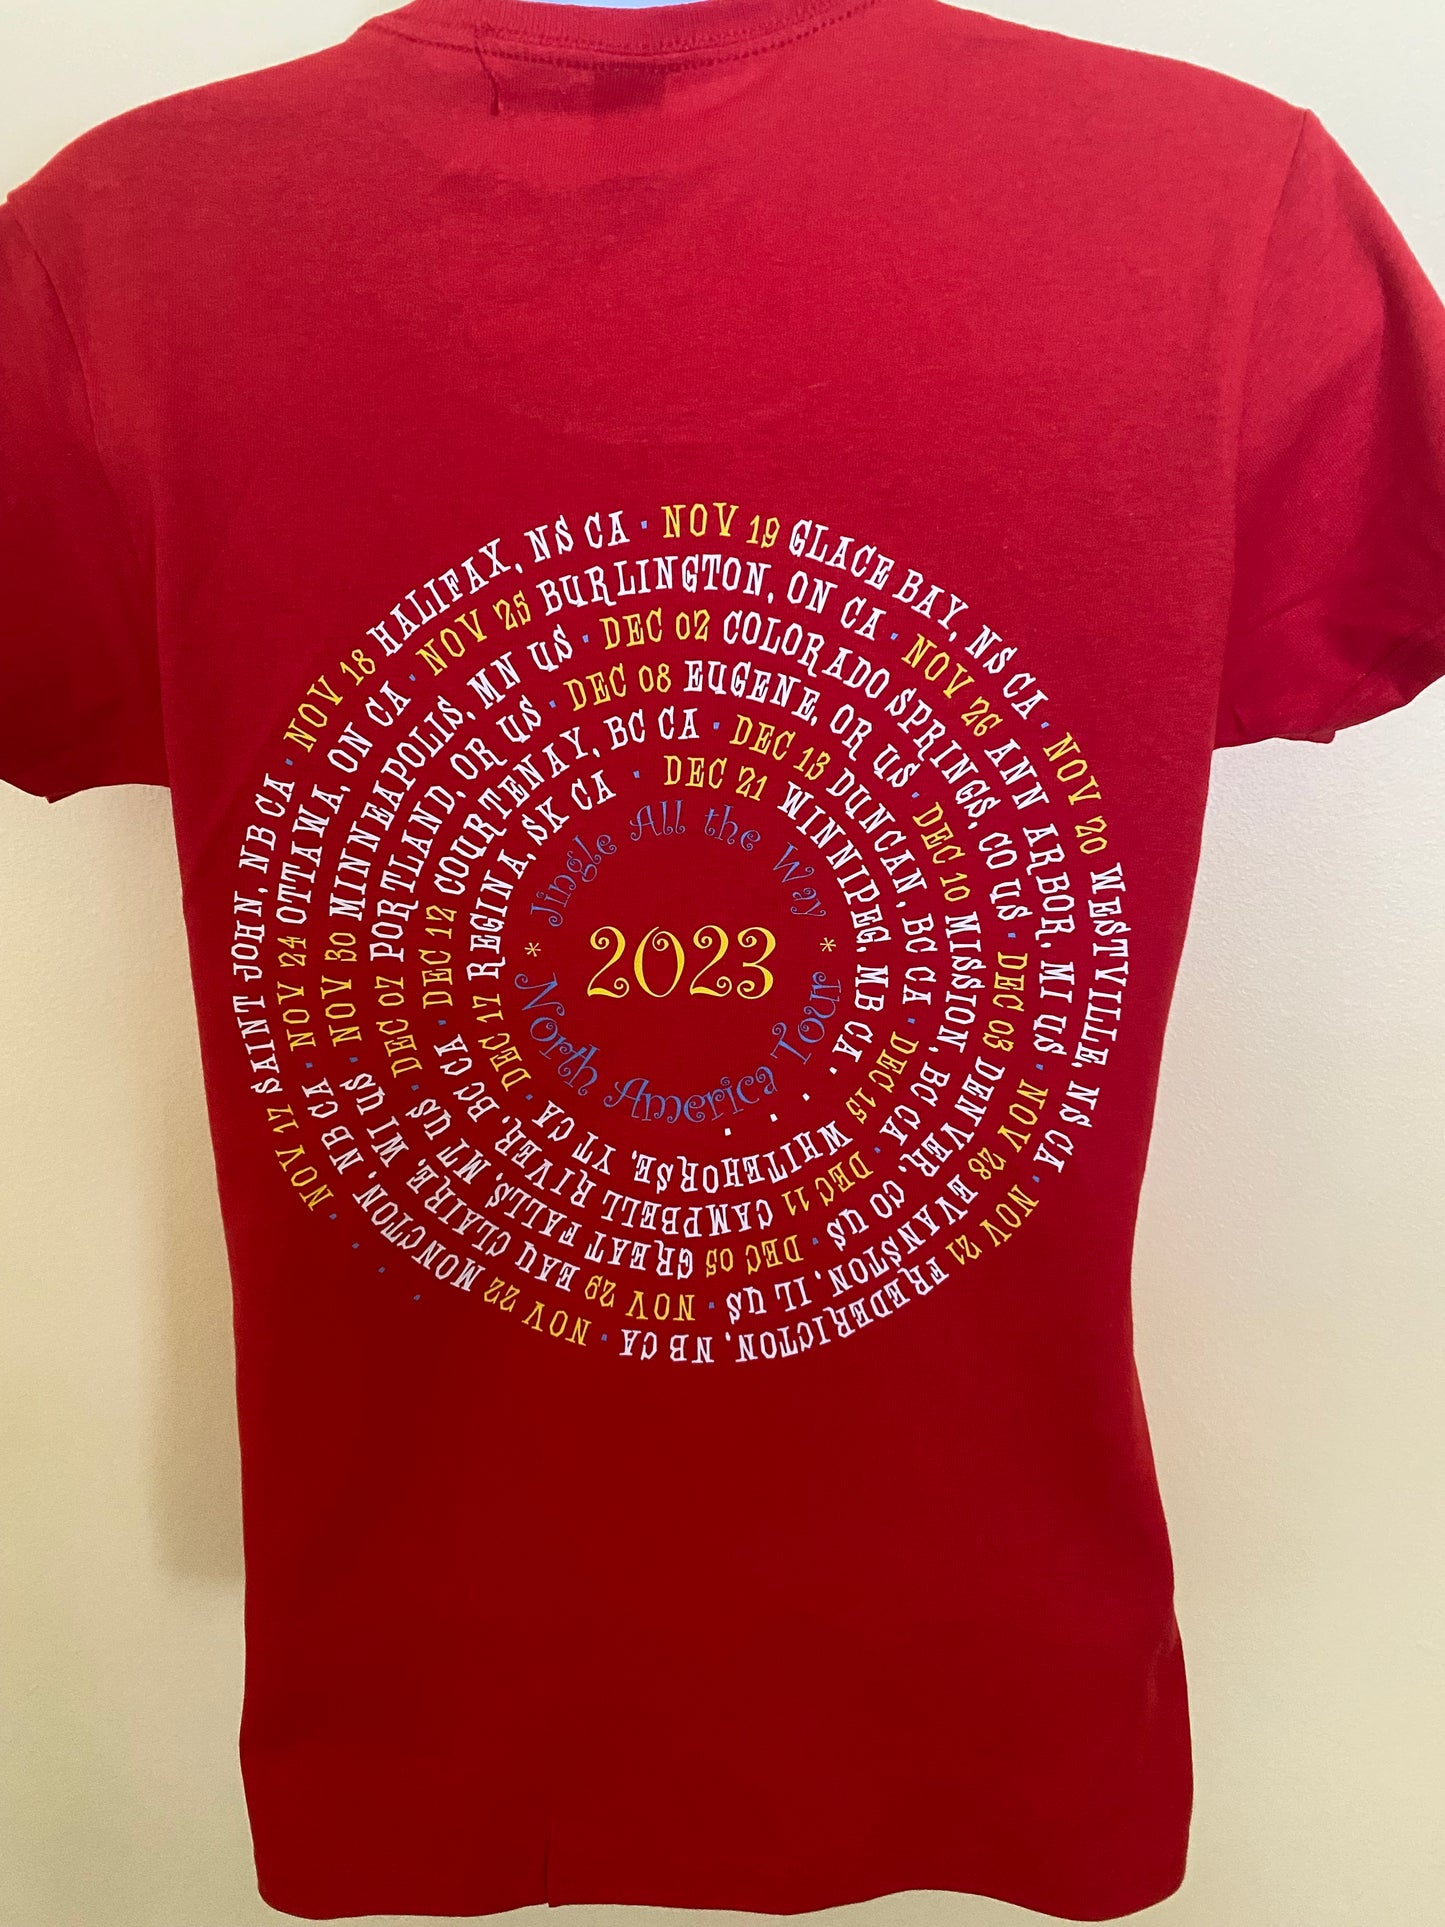 2023 Jingle All The Way Tour Shirt (with dates) - Ladies Cut Red